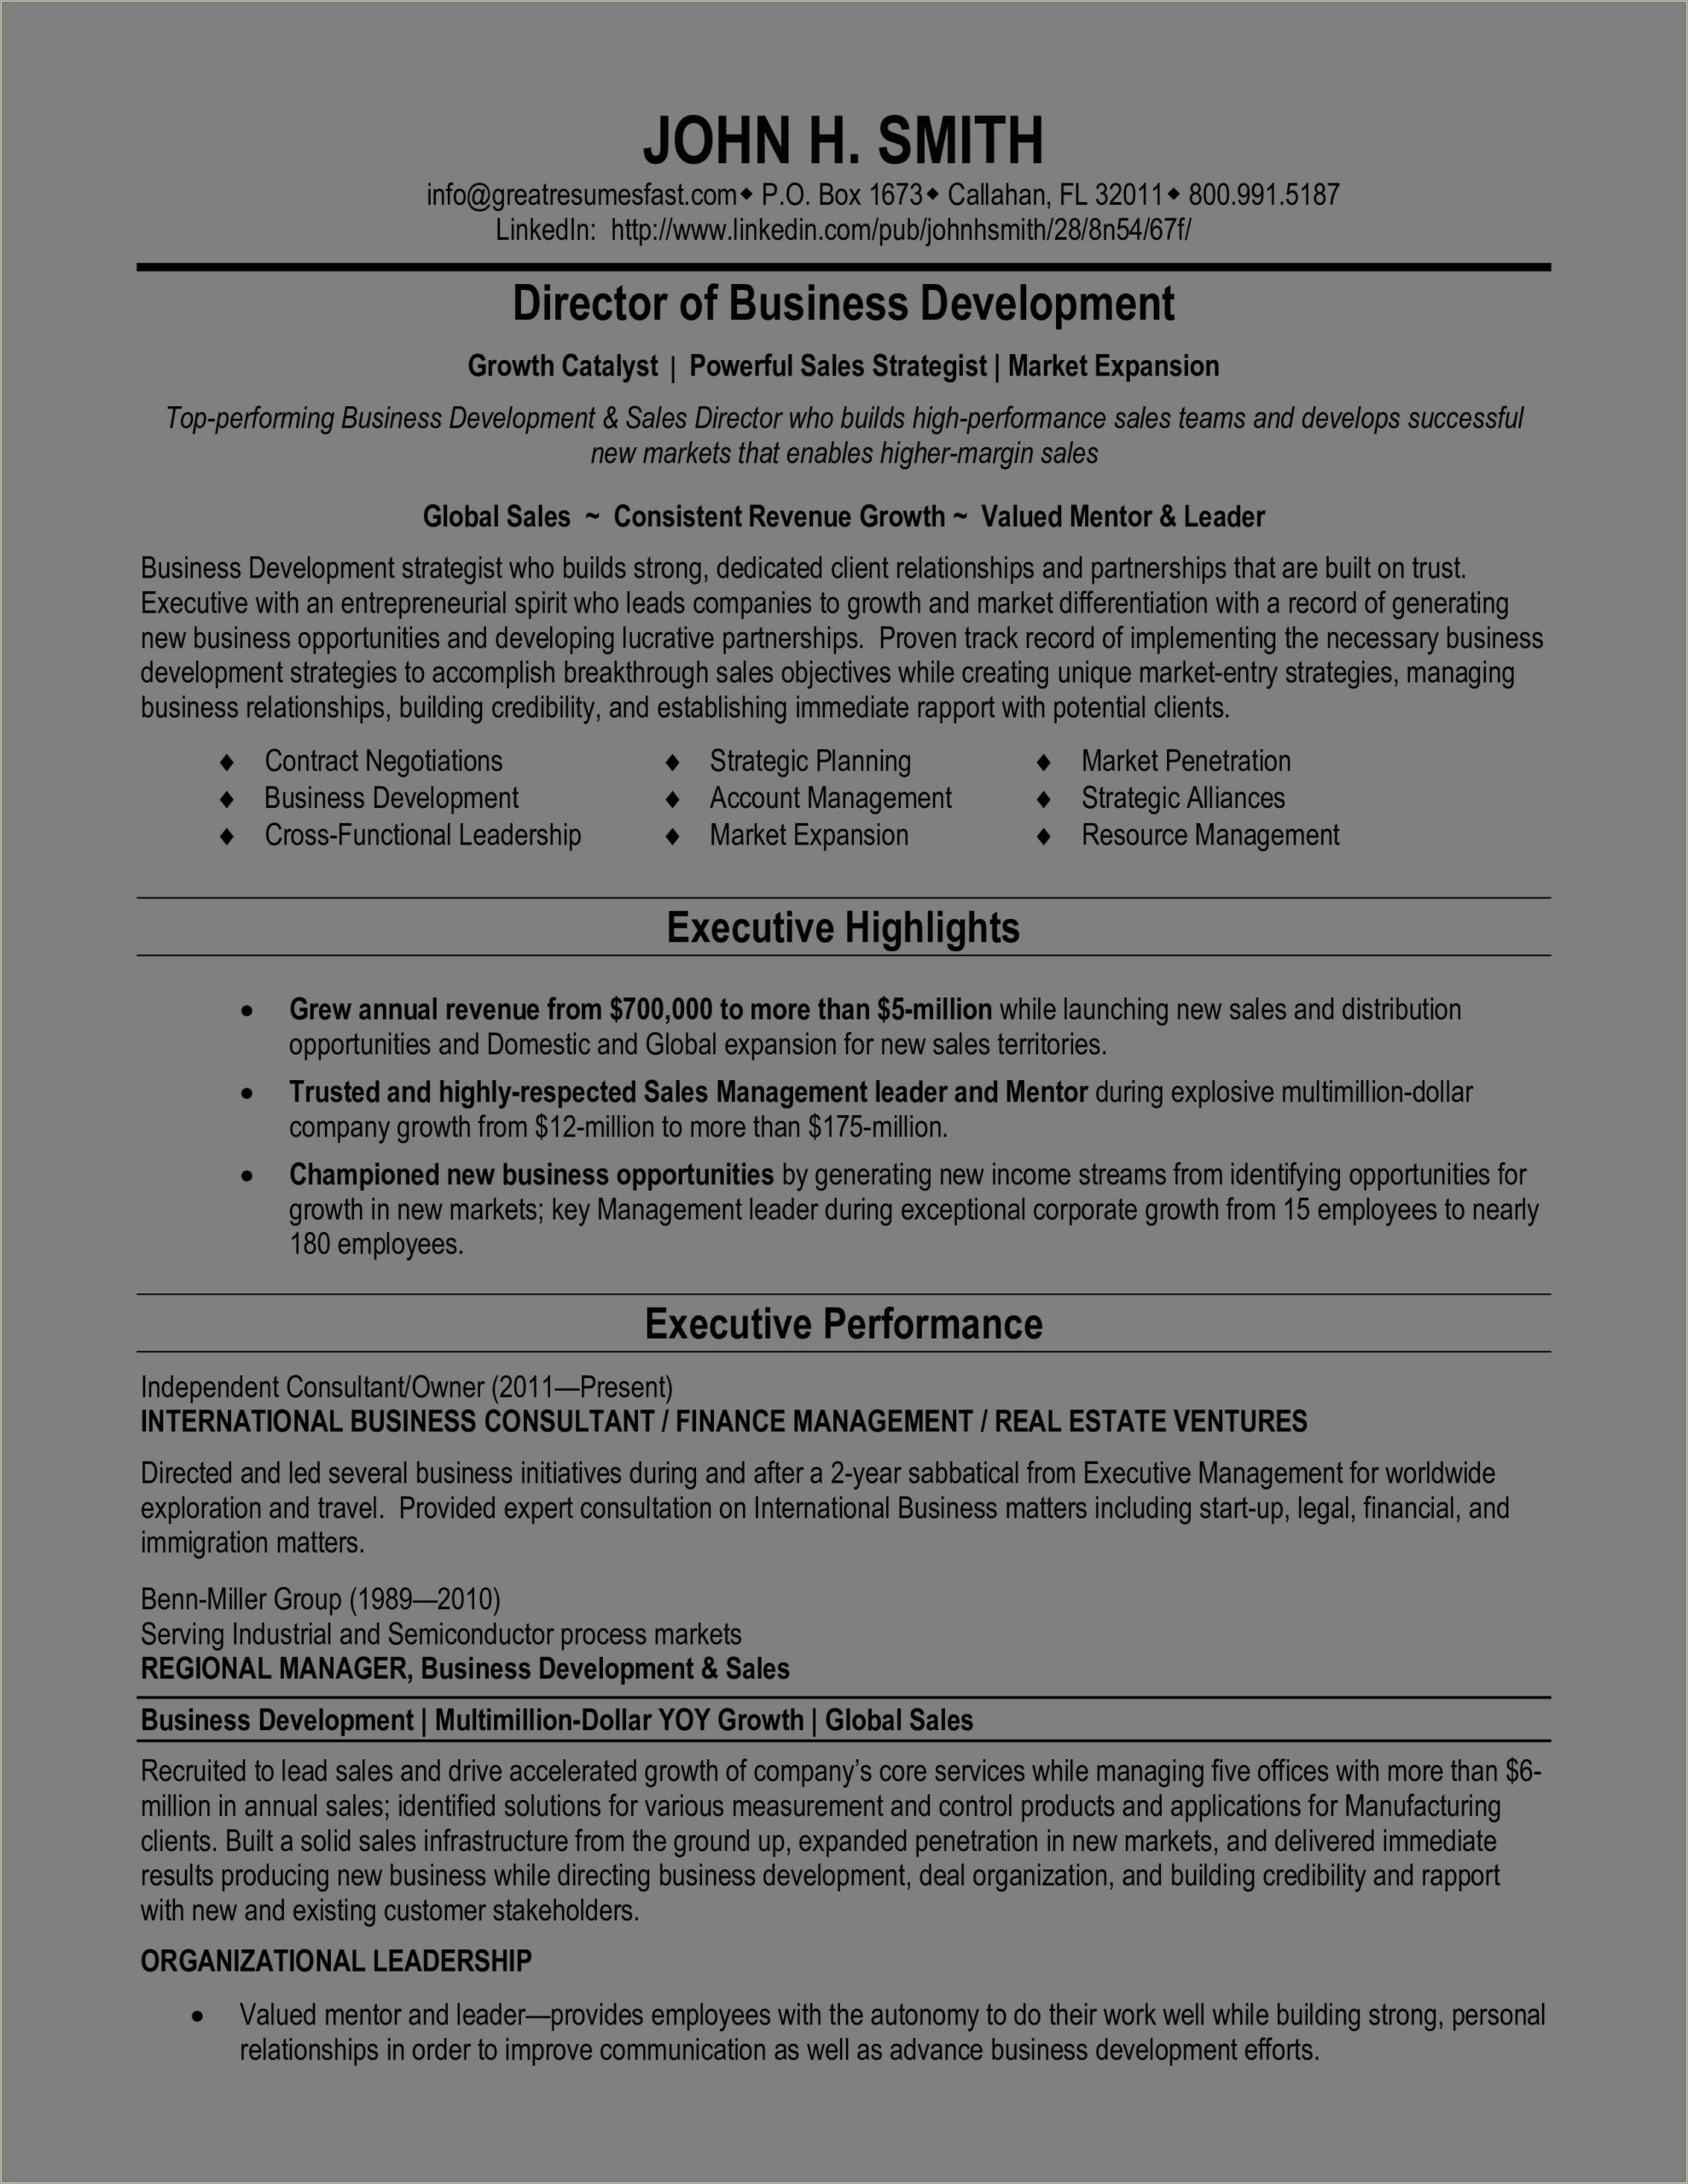 Resume Successful Management And Development Consulting Business